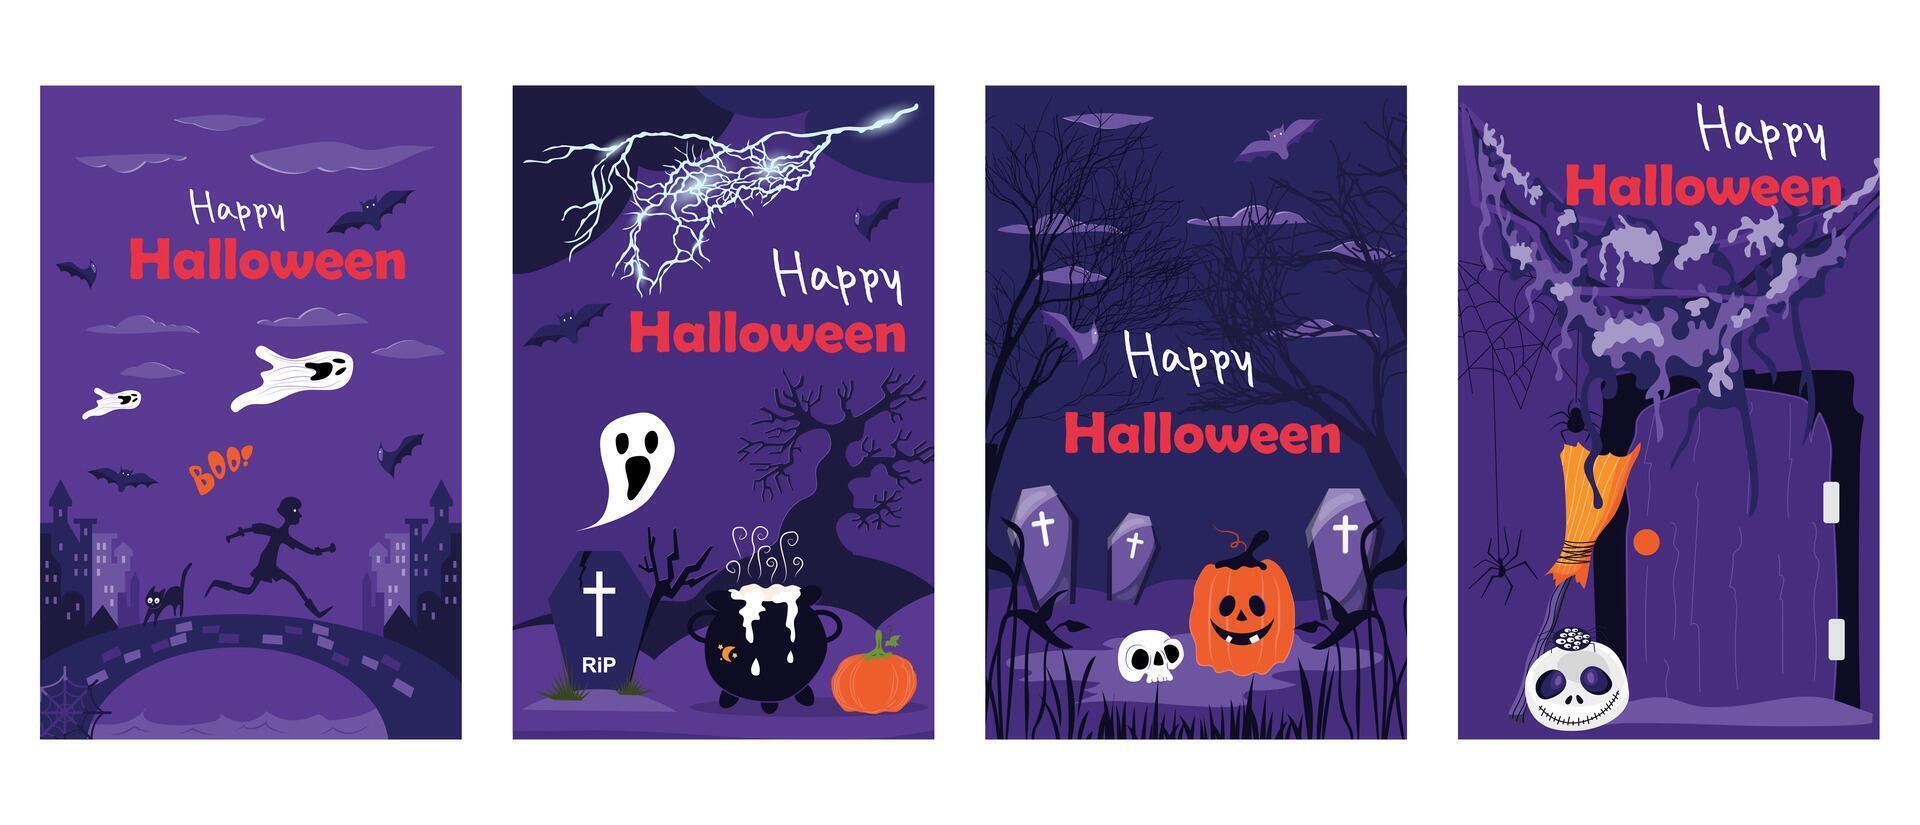 Halloween holiday cover brochure set in trendy flat design. Poster templates with flying spooky ghosts, witch cauldron on cemetery, creepy pumpkins, evil trees and other symbols. Vector illustration.